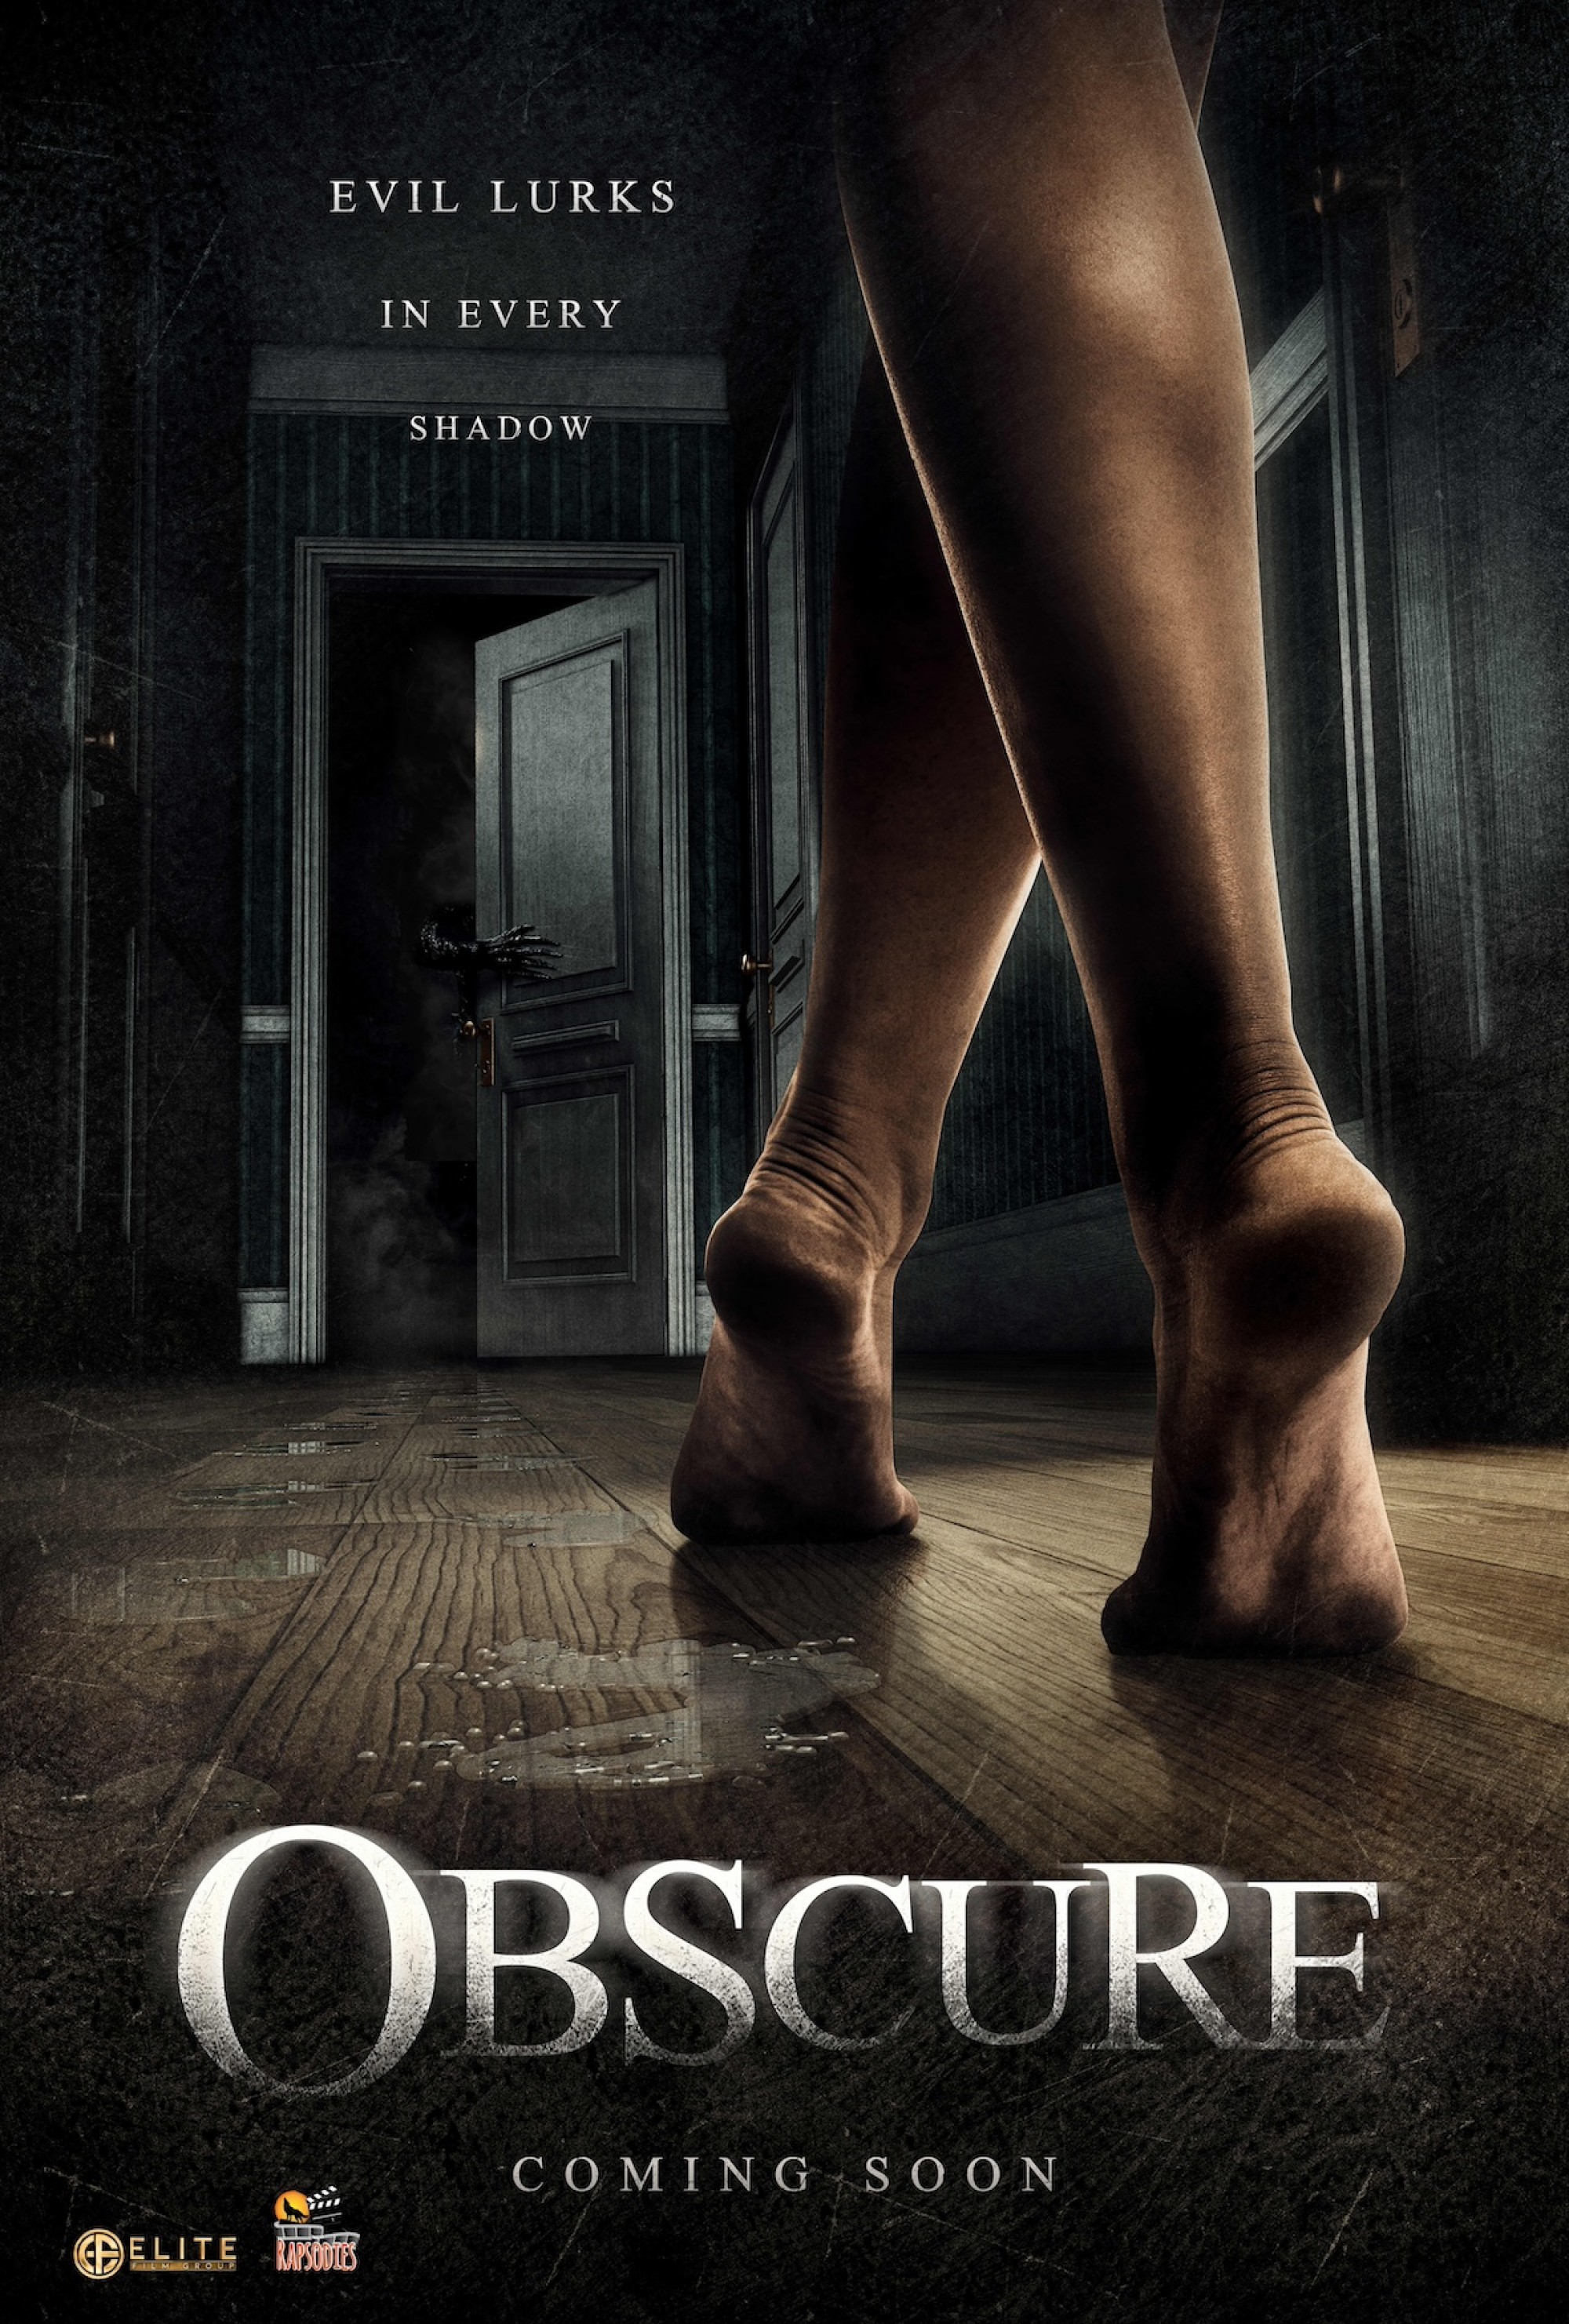 The fourth film co-written and co-produced by Rapsodies is titled "Obscure.